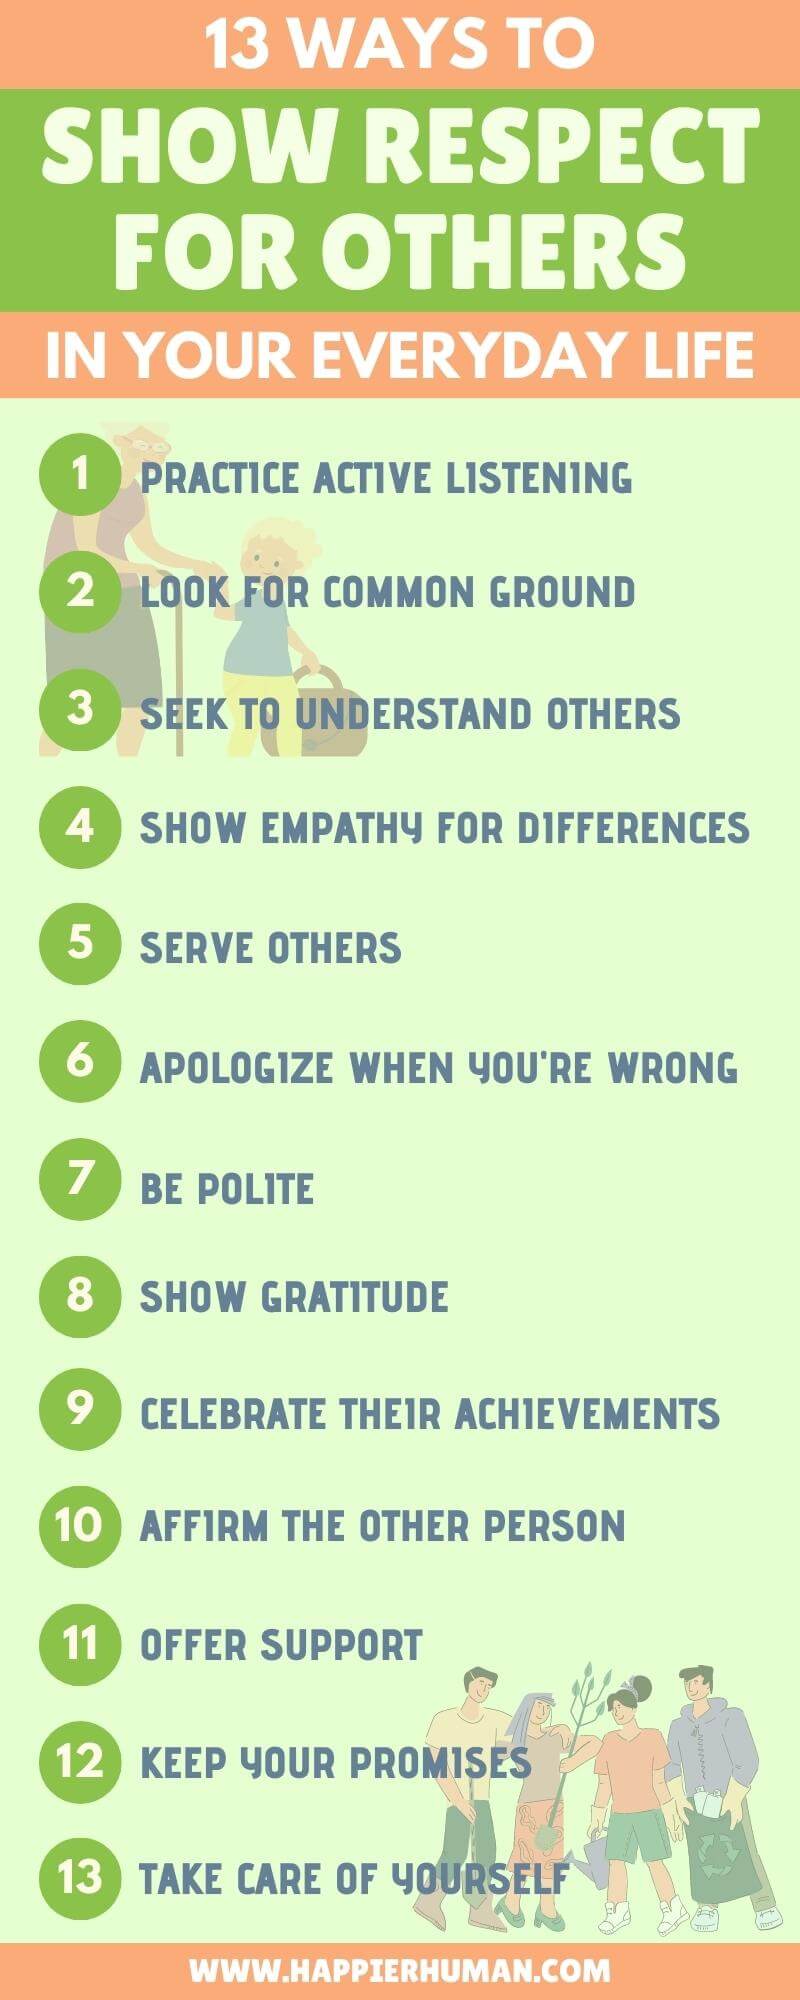 99 Simple Ways to Gain the Respect of Others